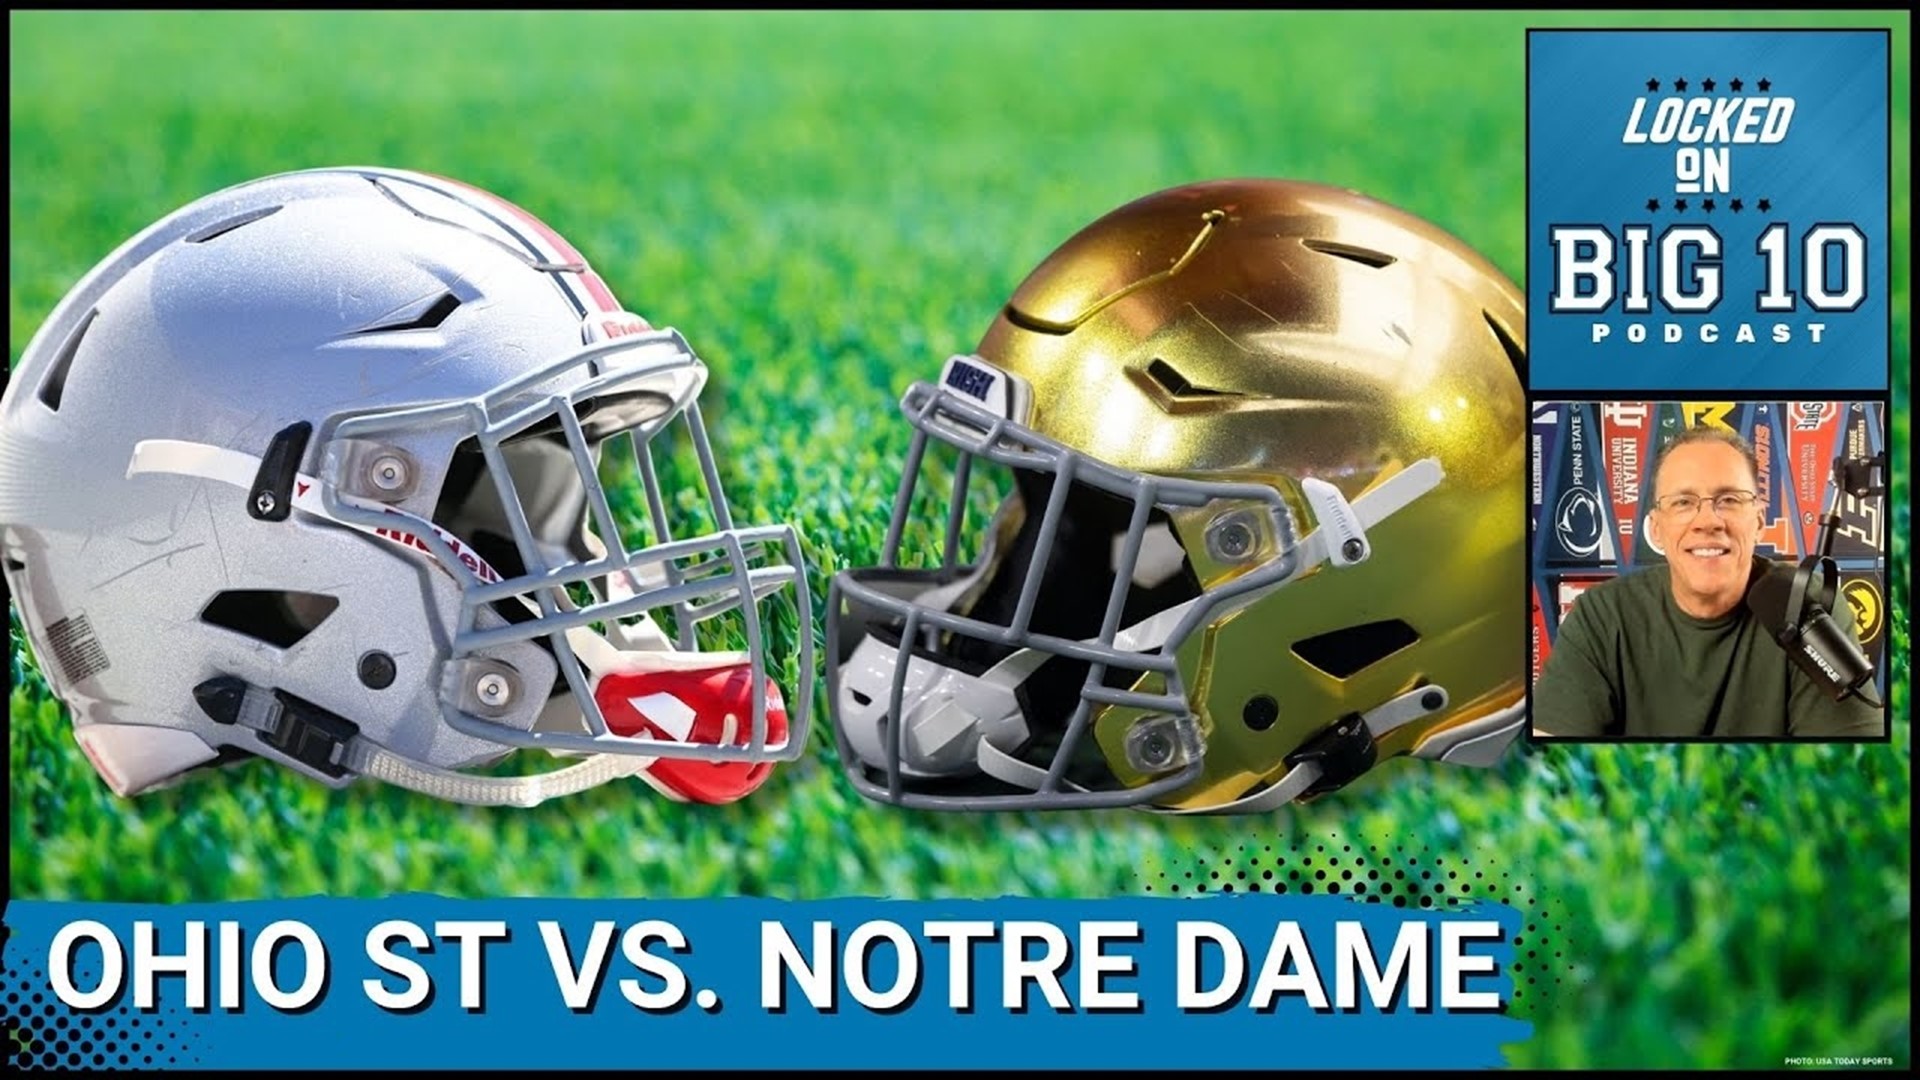 The Ohio State Buckeyes football team travels to South Bend, Indiana to play the Notre Dame Fighting Irish in a September showdown